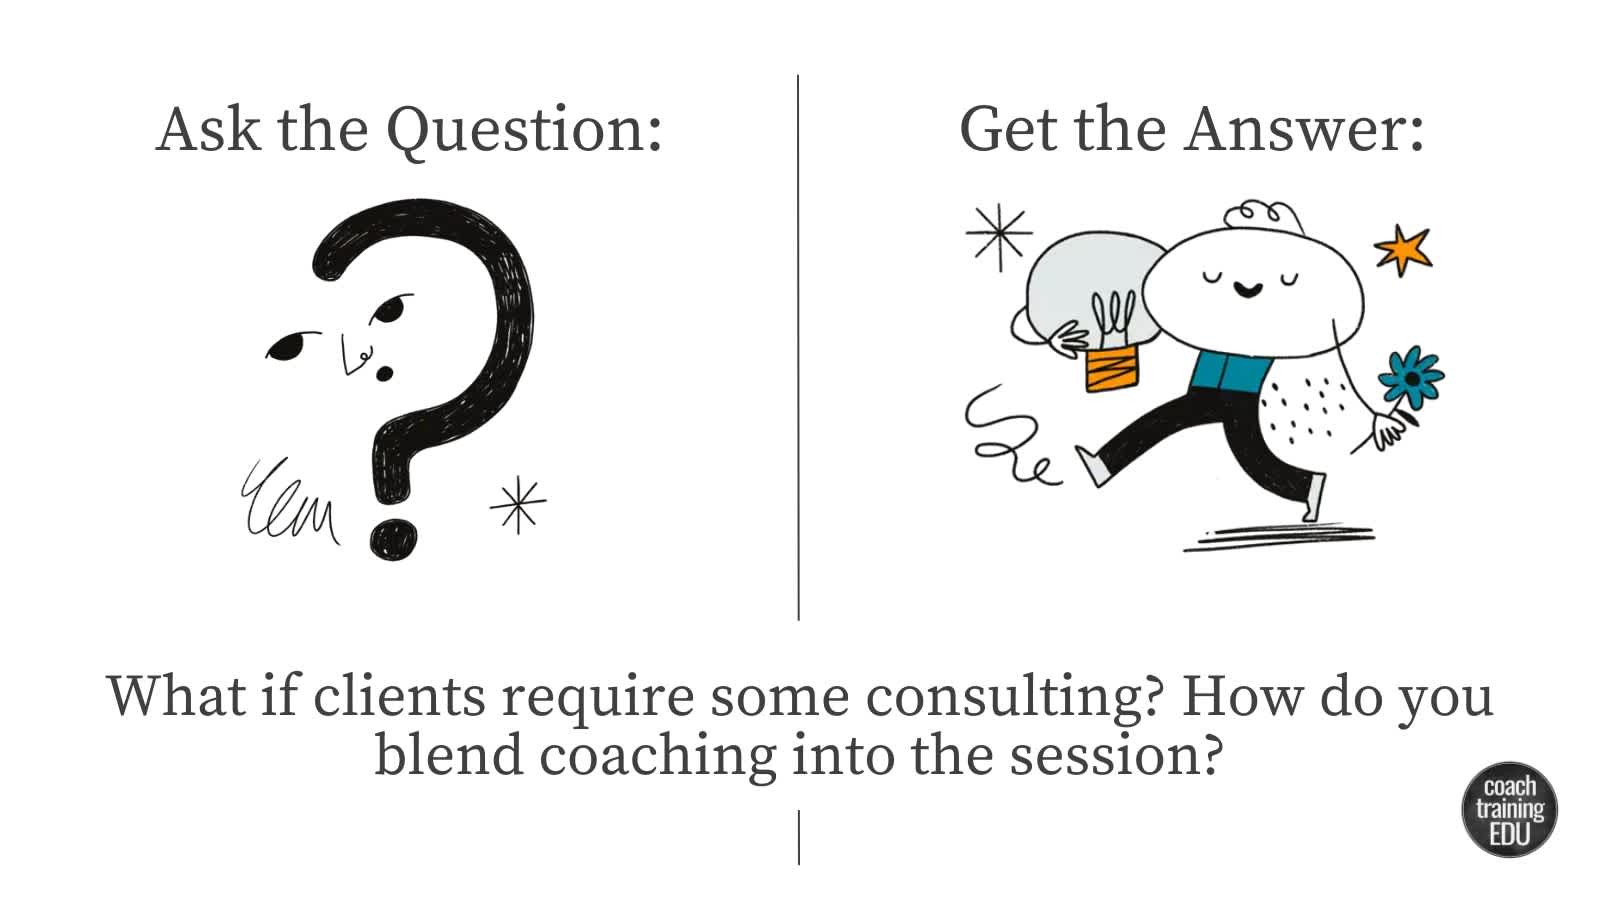 What if clients require some consulting? How do you blend coaching into the session?